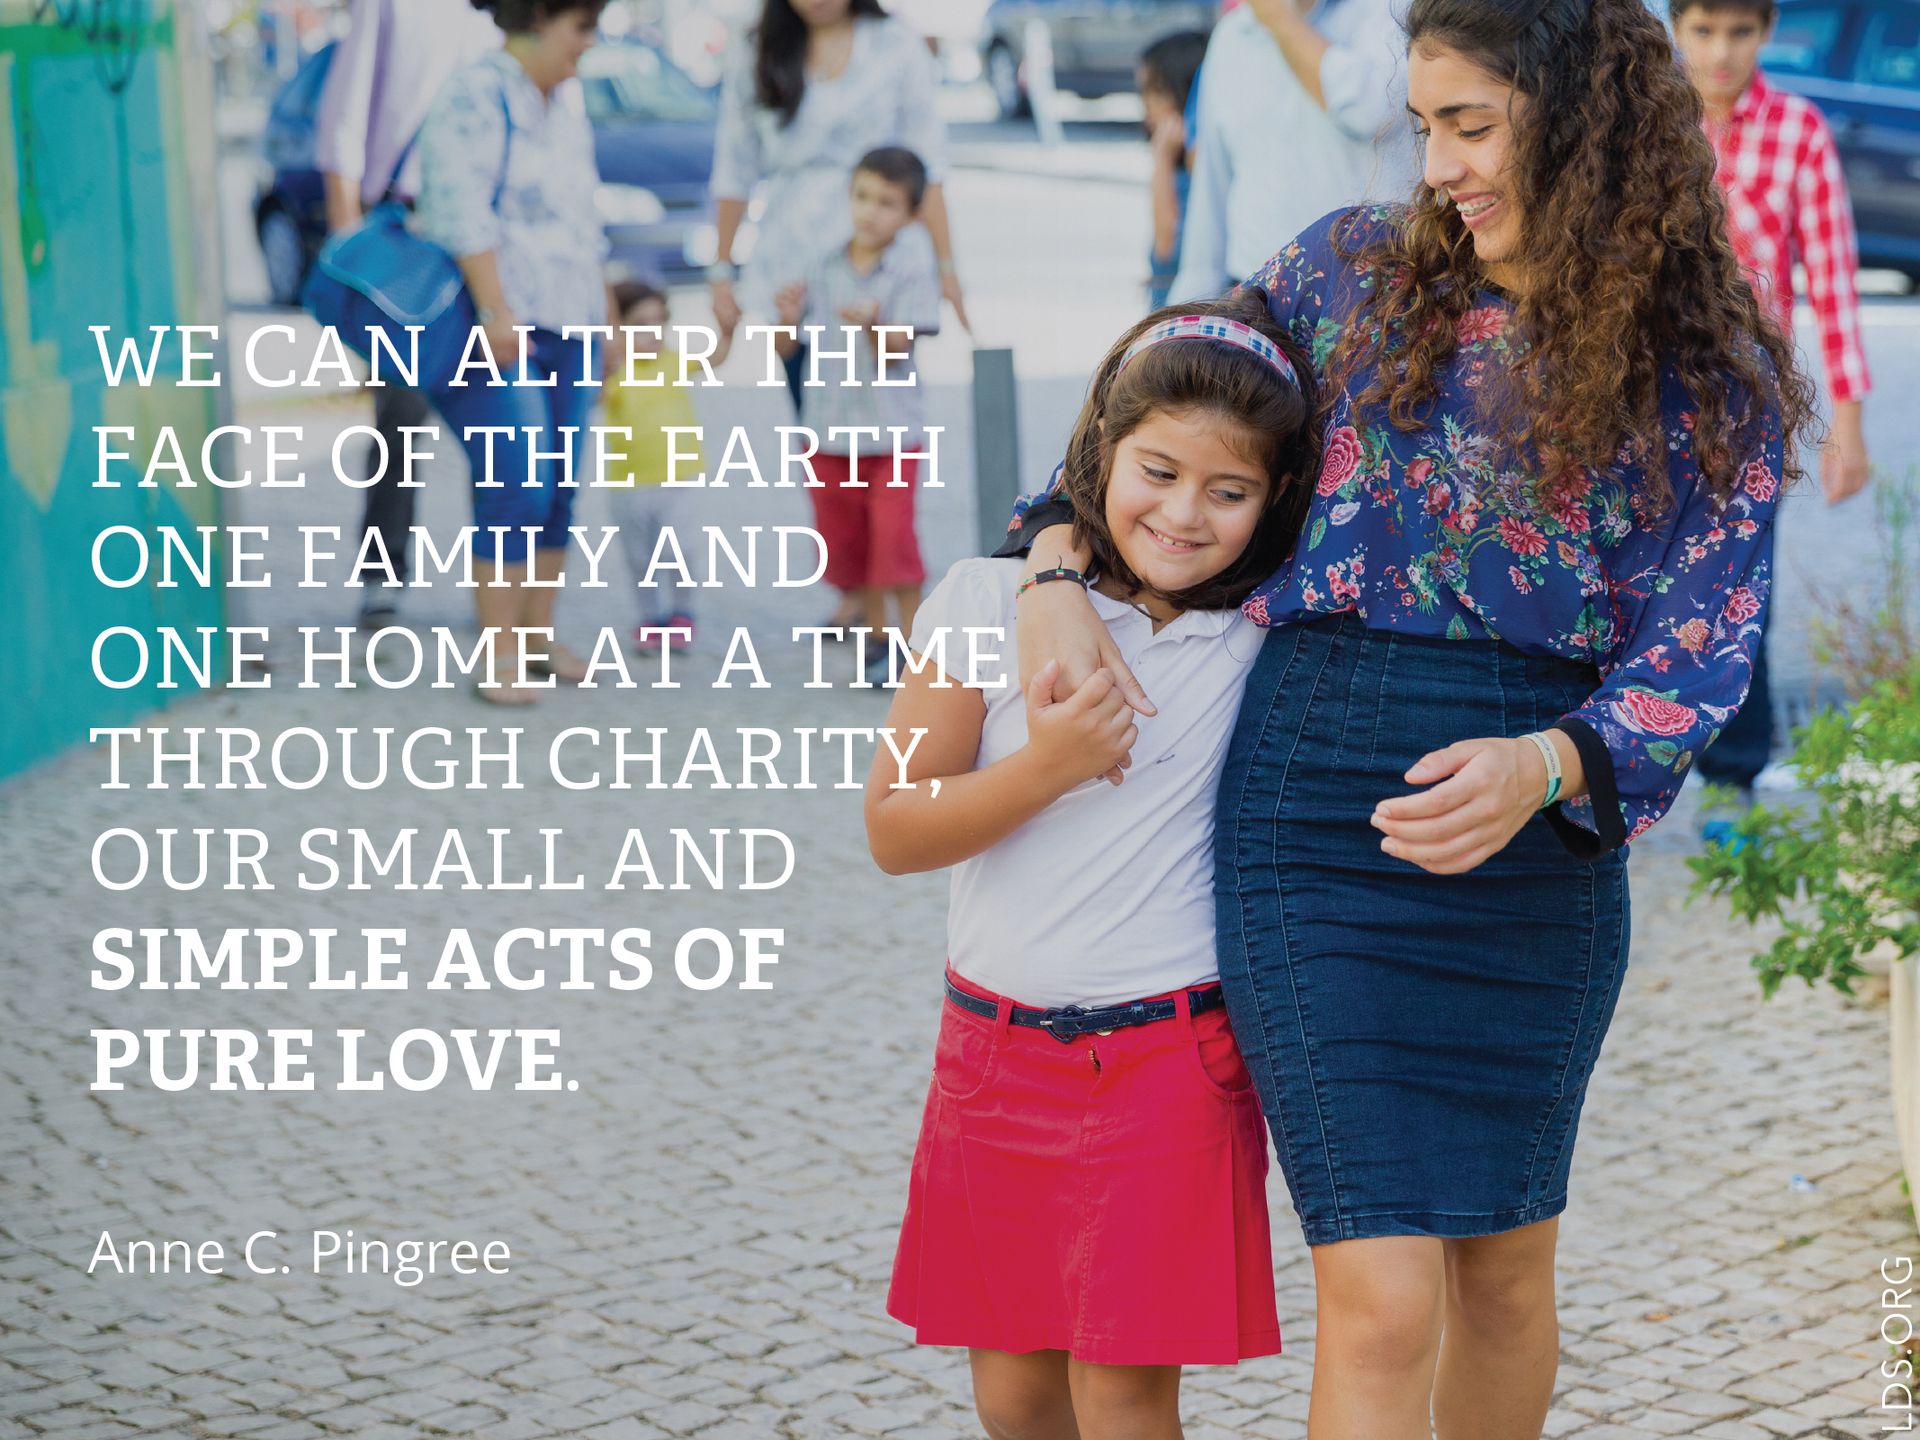 “We can alter the face of the earth one family and one home at a time through charity, our small and simple acts of pure love.”—Sister Anne C. Pingree, “Charity: One Family, One Home at a Time”